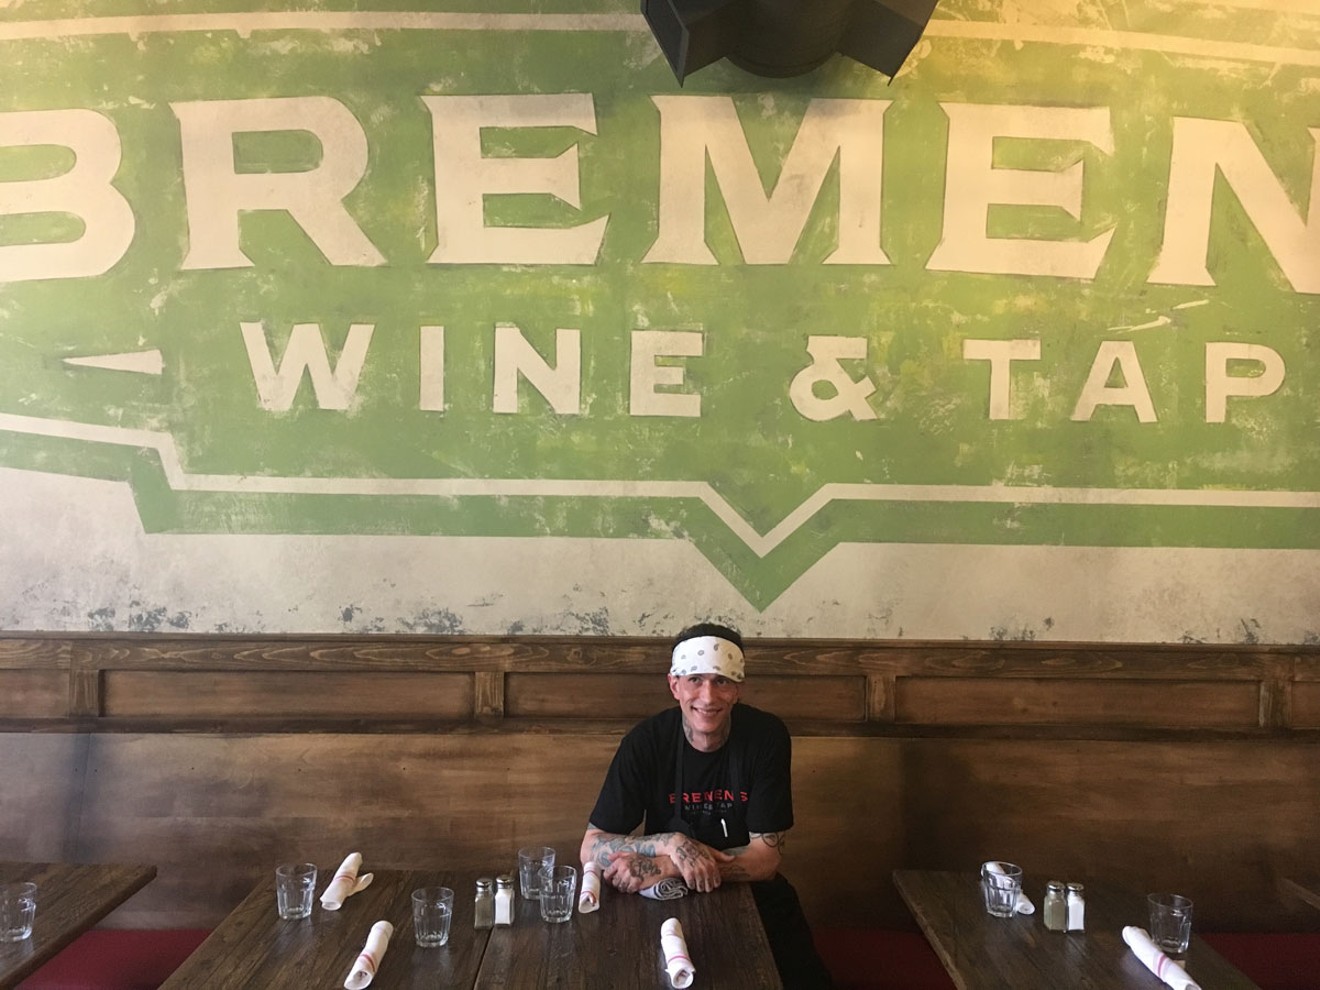 Matt Selby and Bremen’s Wine & Tap have parted ways.